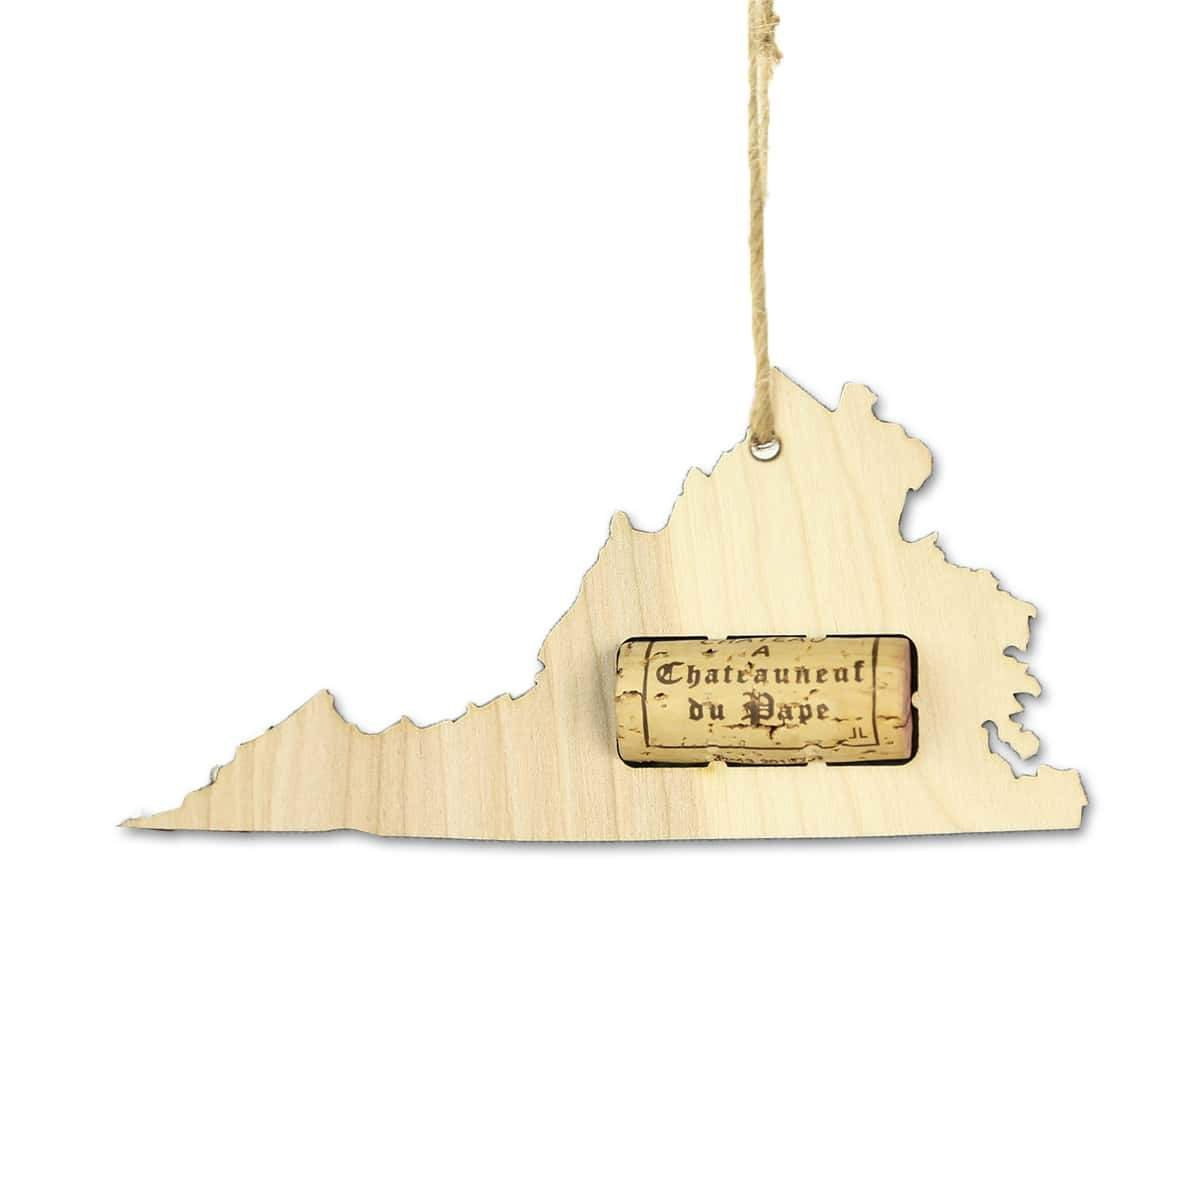 Torched Products Wine Cork Holder Virginia Wine Cork Holder Ornaments (781206782069)